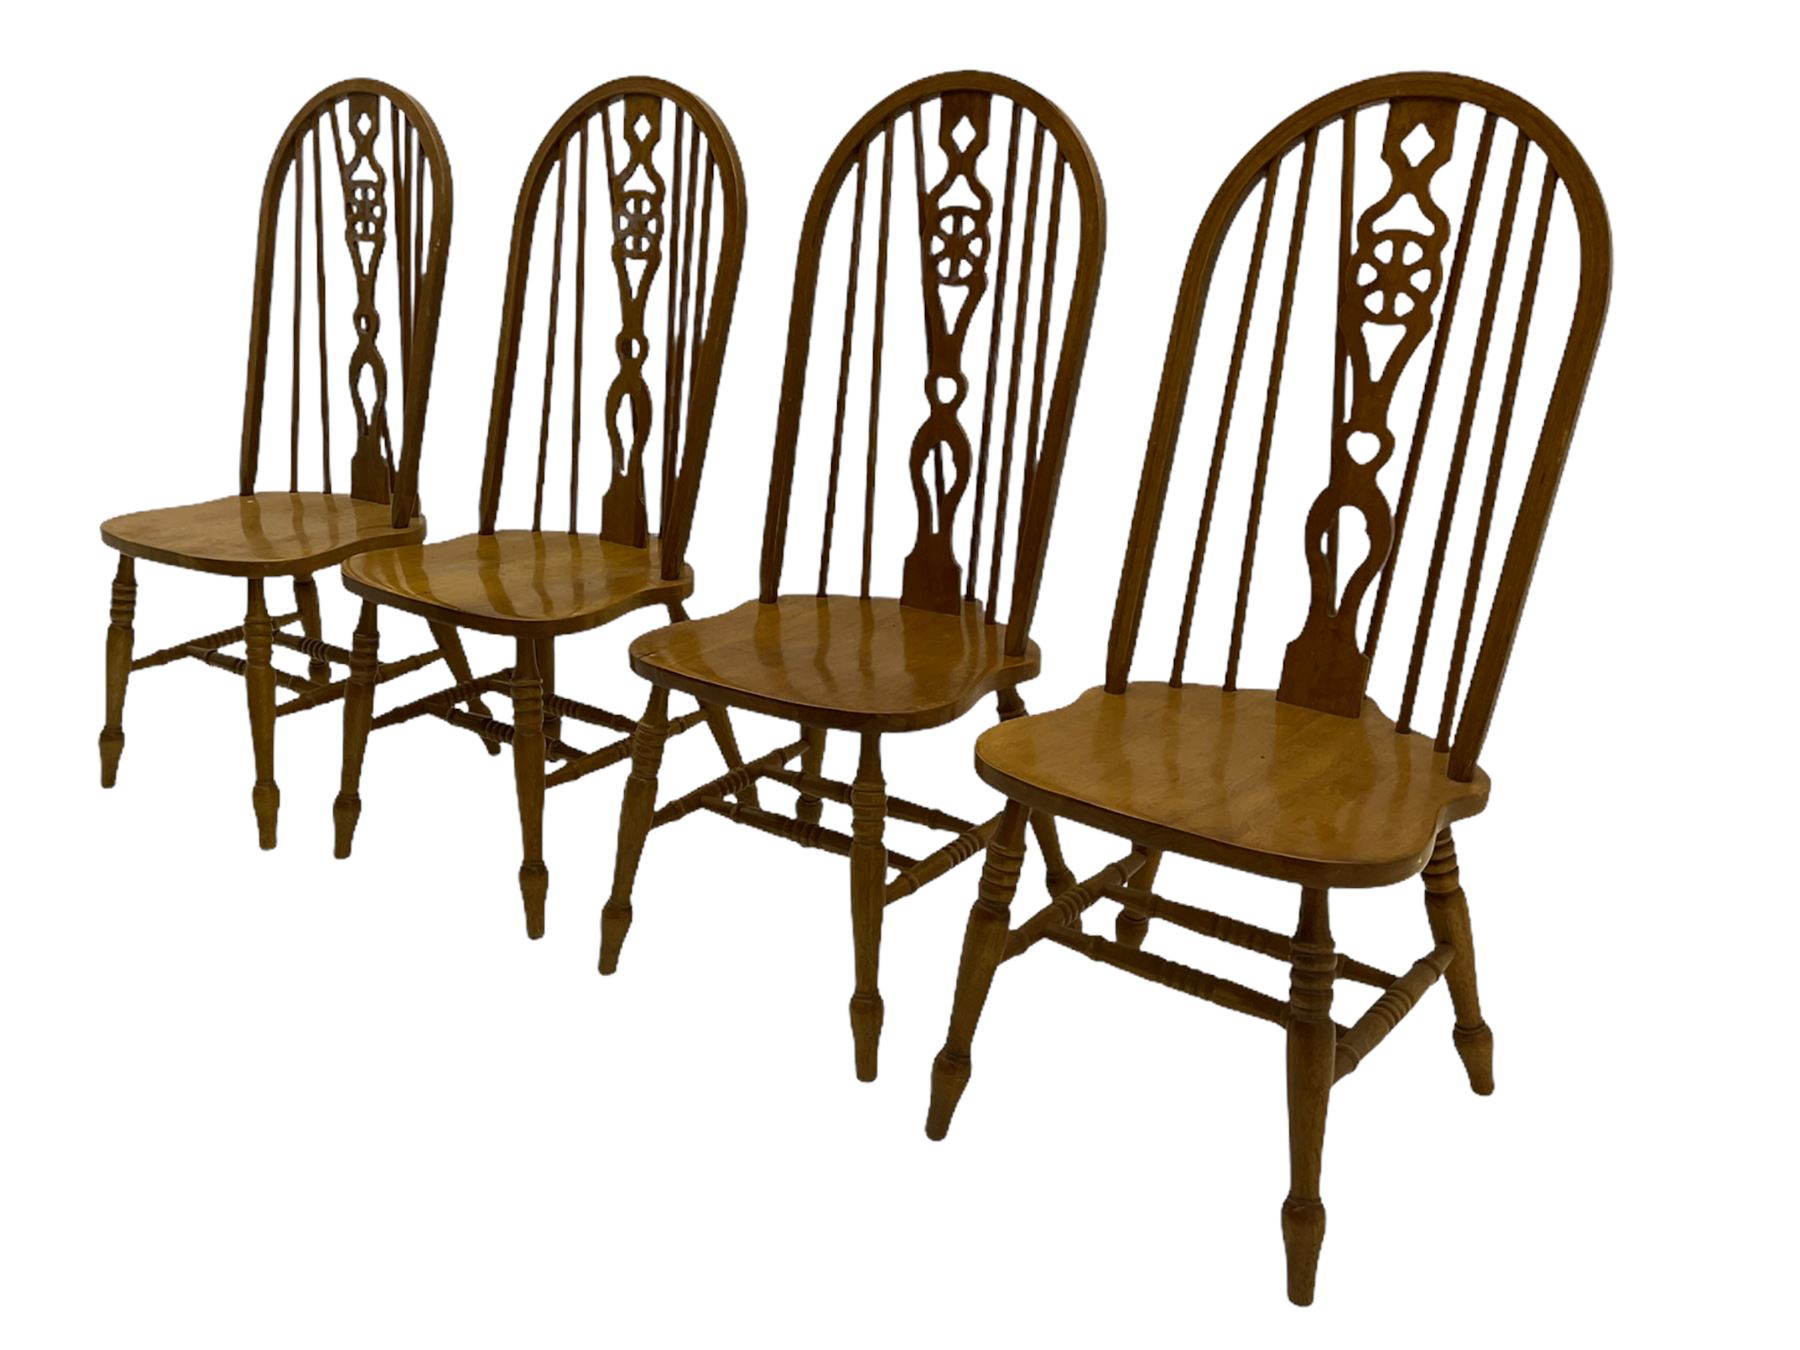 Set of six lightwood Windsor style dining chairs - Image 9 of 12